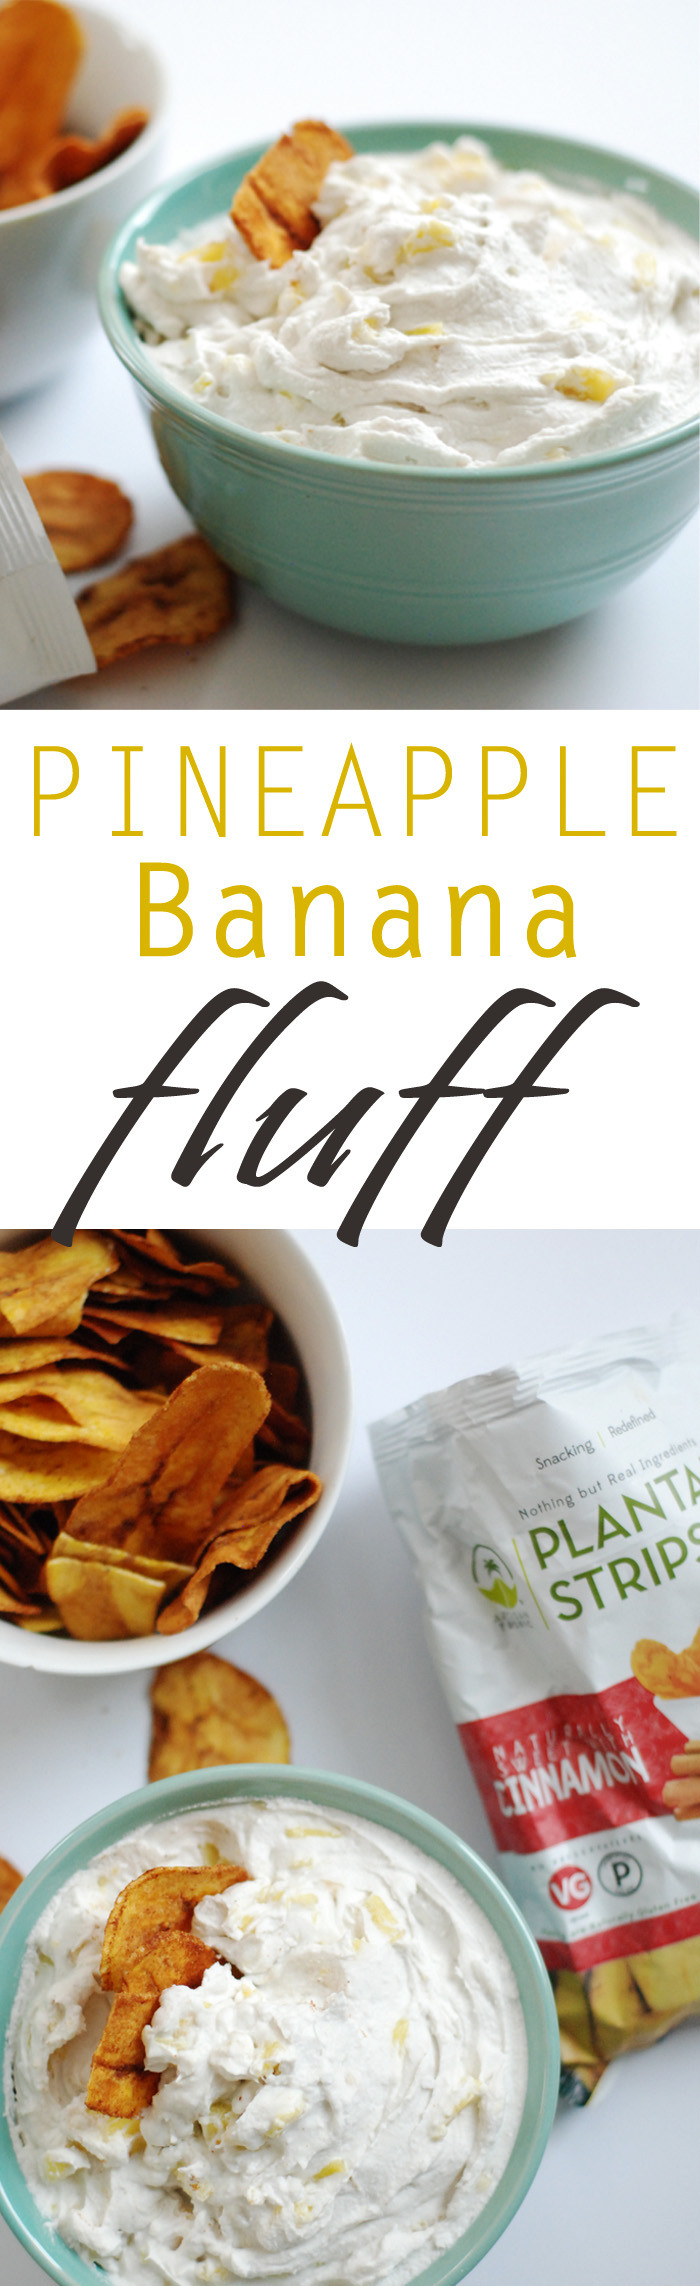 Dairy Free Desserts whole Foods New Pineapple Banana Fluff by whole fork Dairy Free Sugar